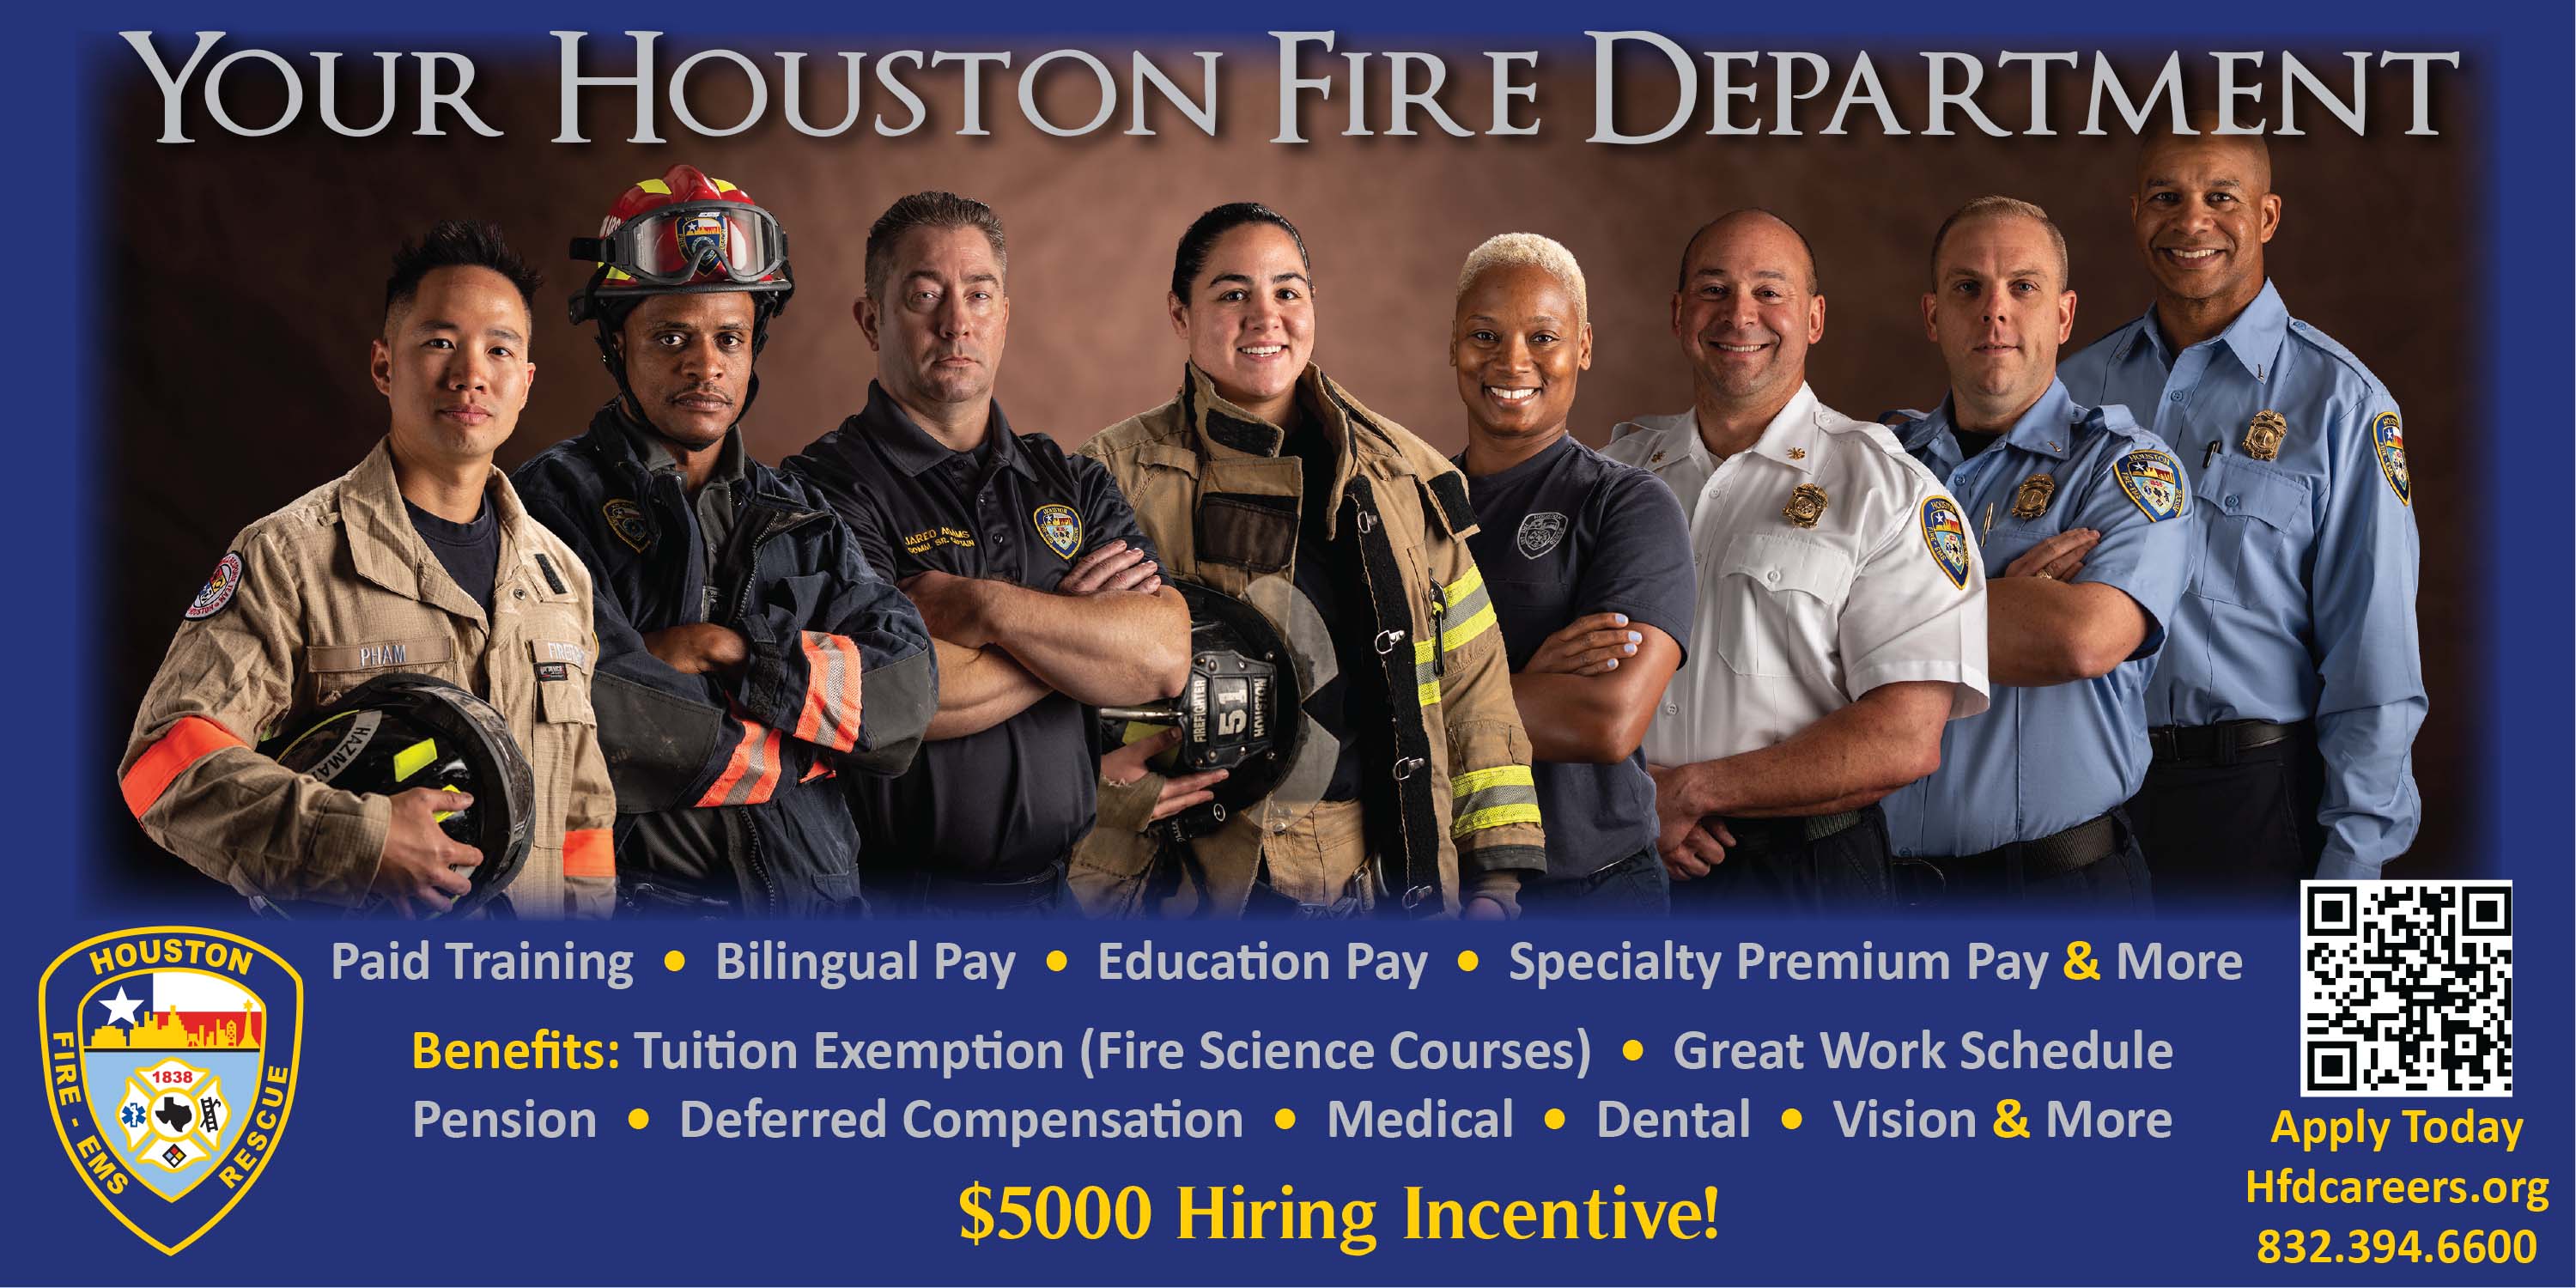 various firefighters lined up in different uniforms with the following text and information on how to join the Houston Fire Department.